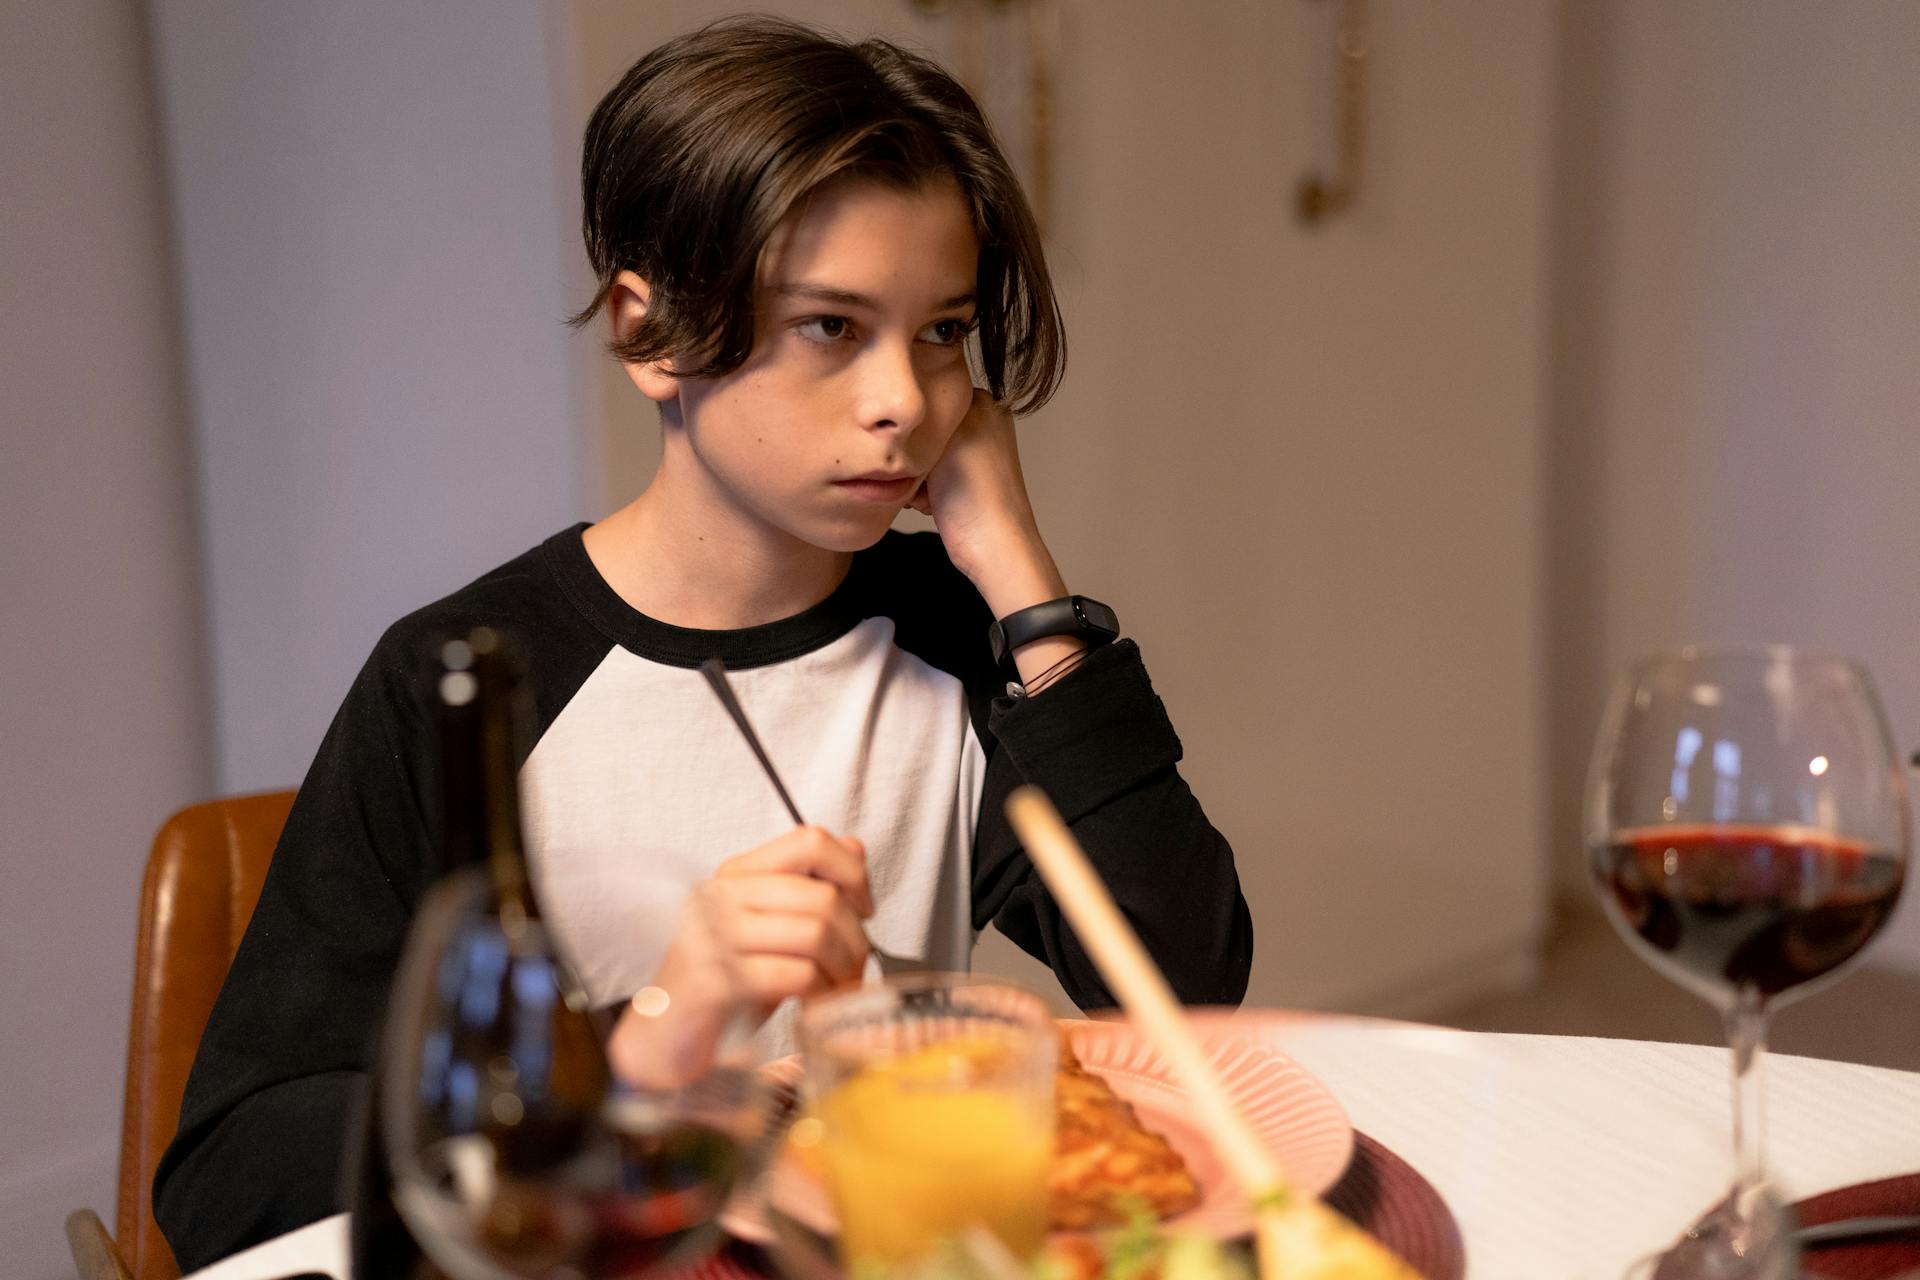 A sad boy at the dinner table | Source: Pexels